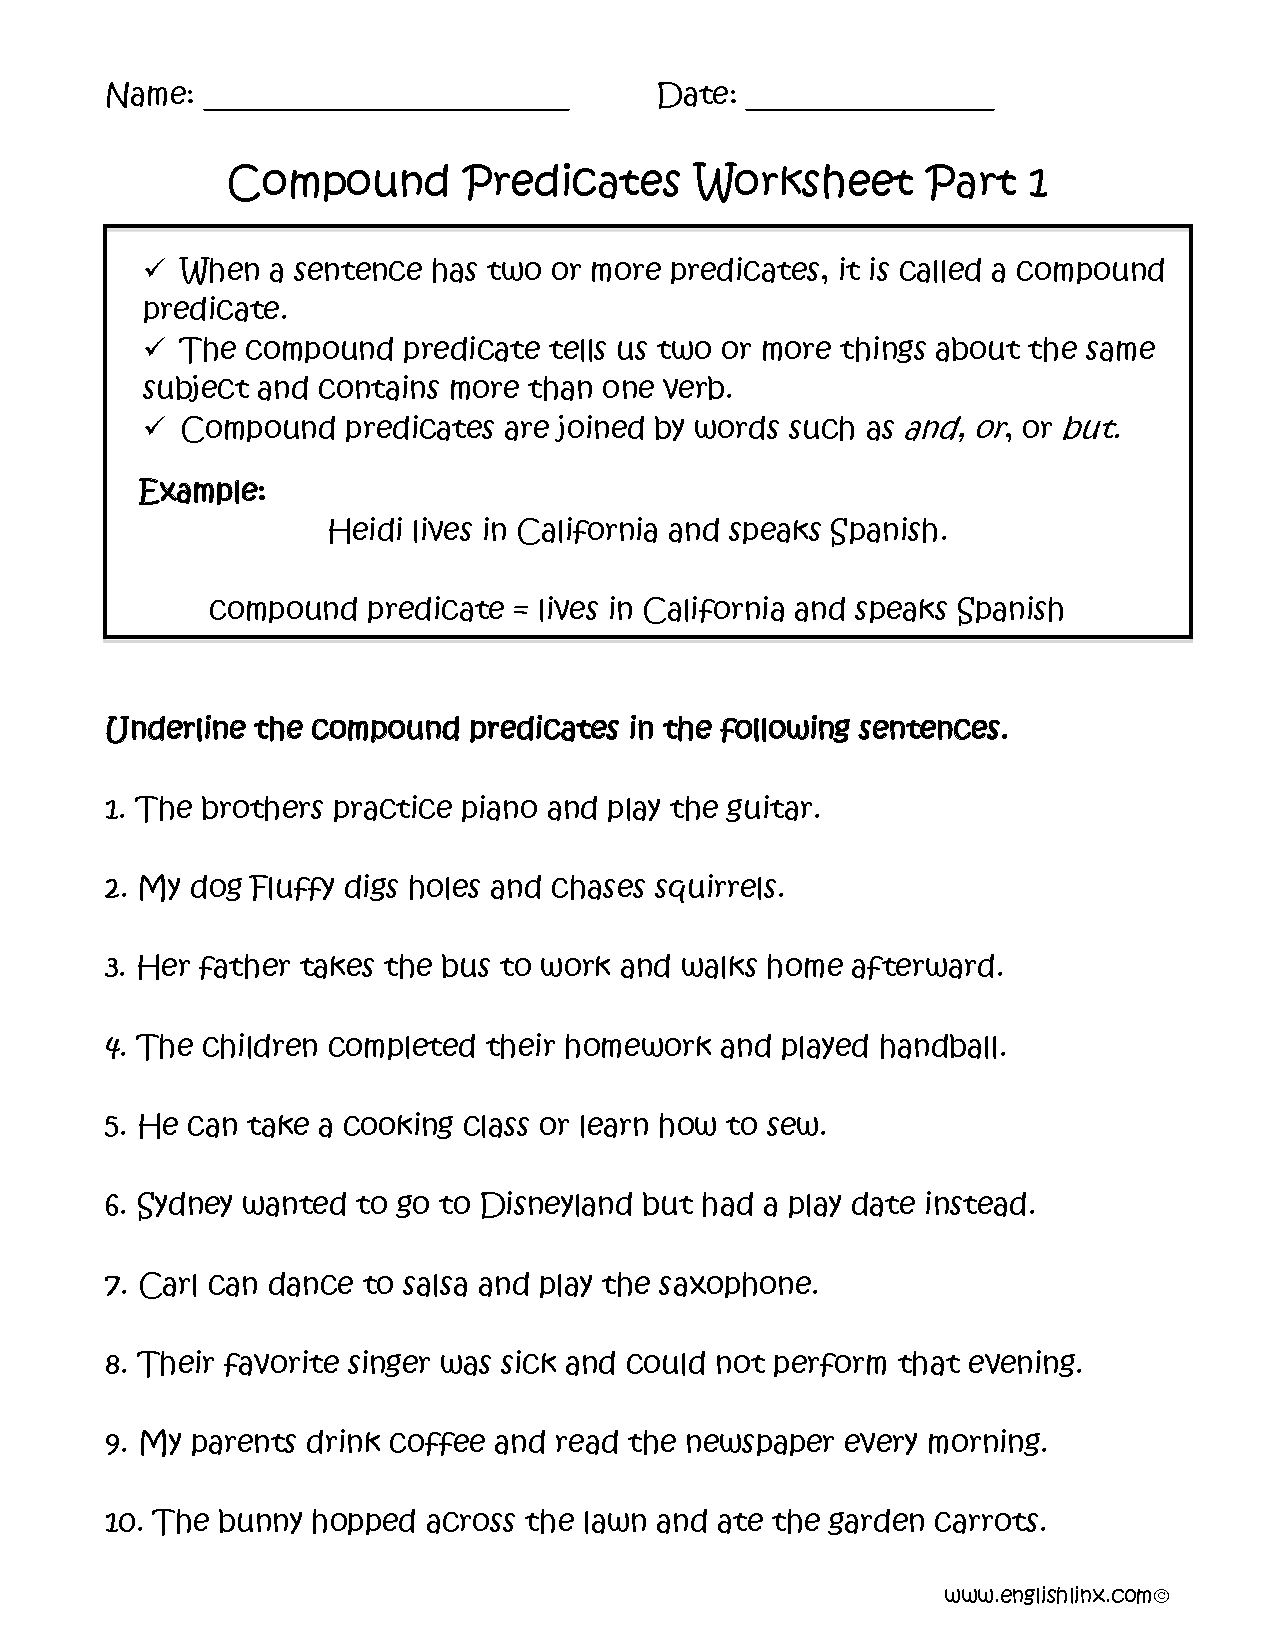 Subject And Predicate Worksheets Compound Predicate Worksheet Part 1